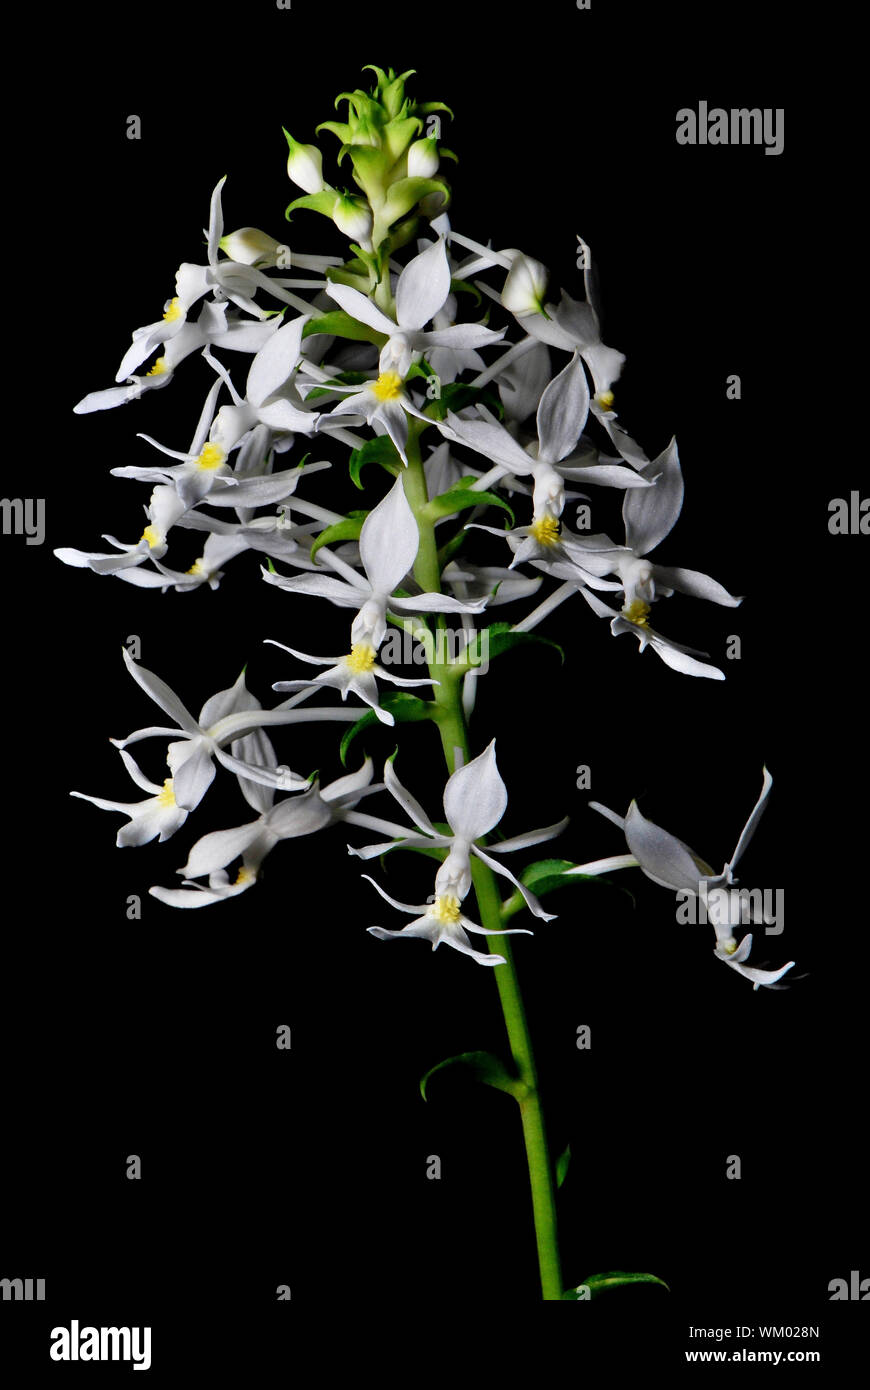 Beautiful white and yellow ground orchid flower, Calanthe leonidii, isolated on a black background Stock Photo